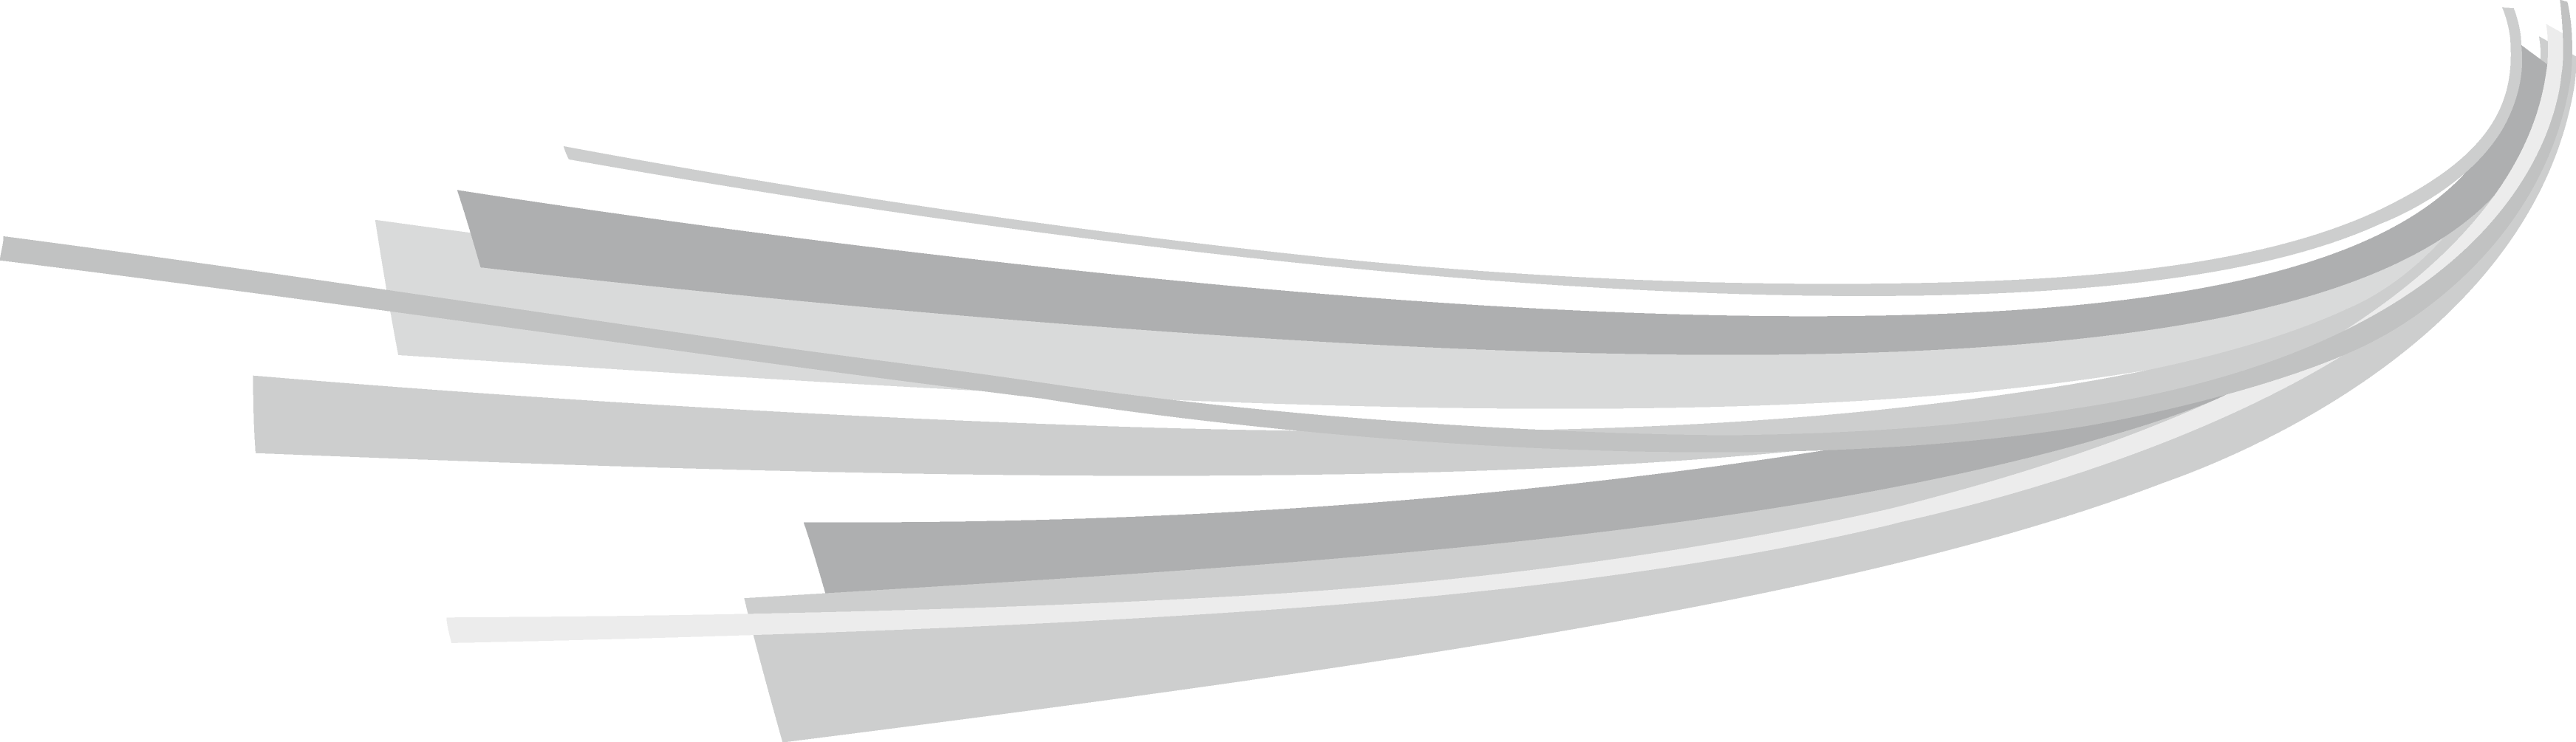 Grey Abstract Lines PNG Image with Transparent Background